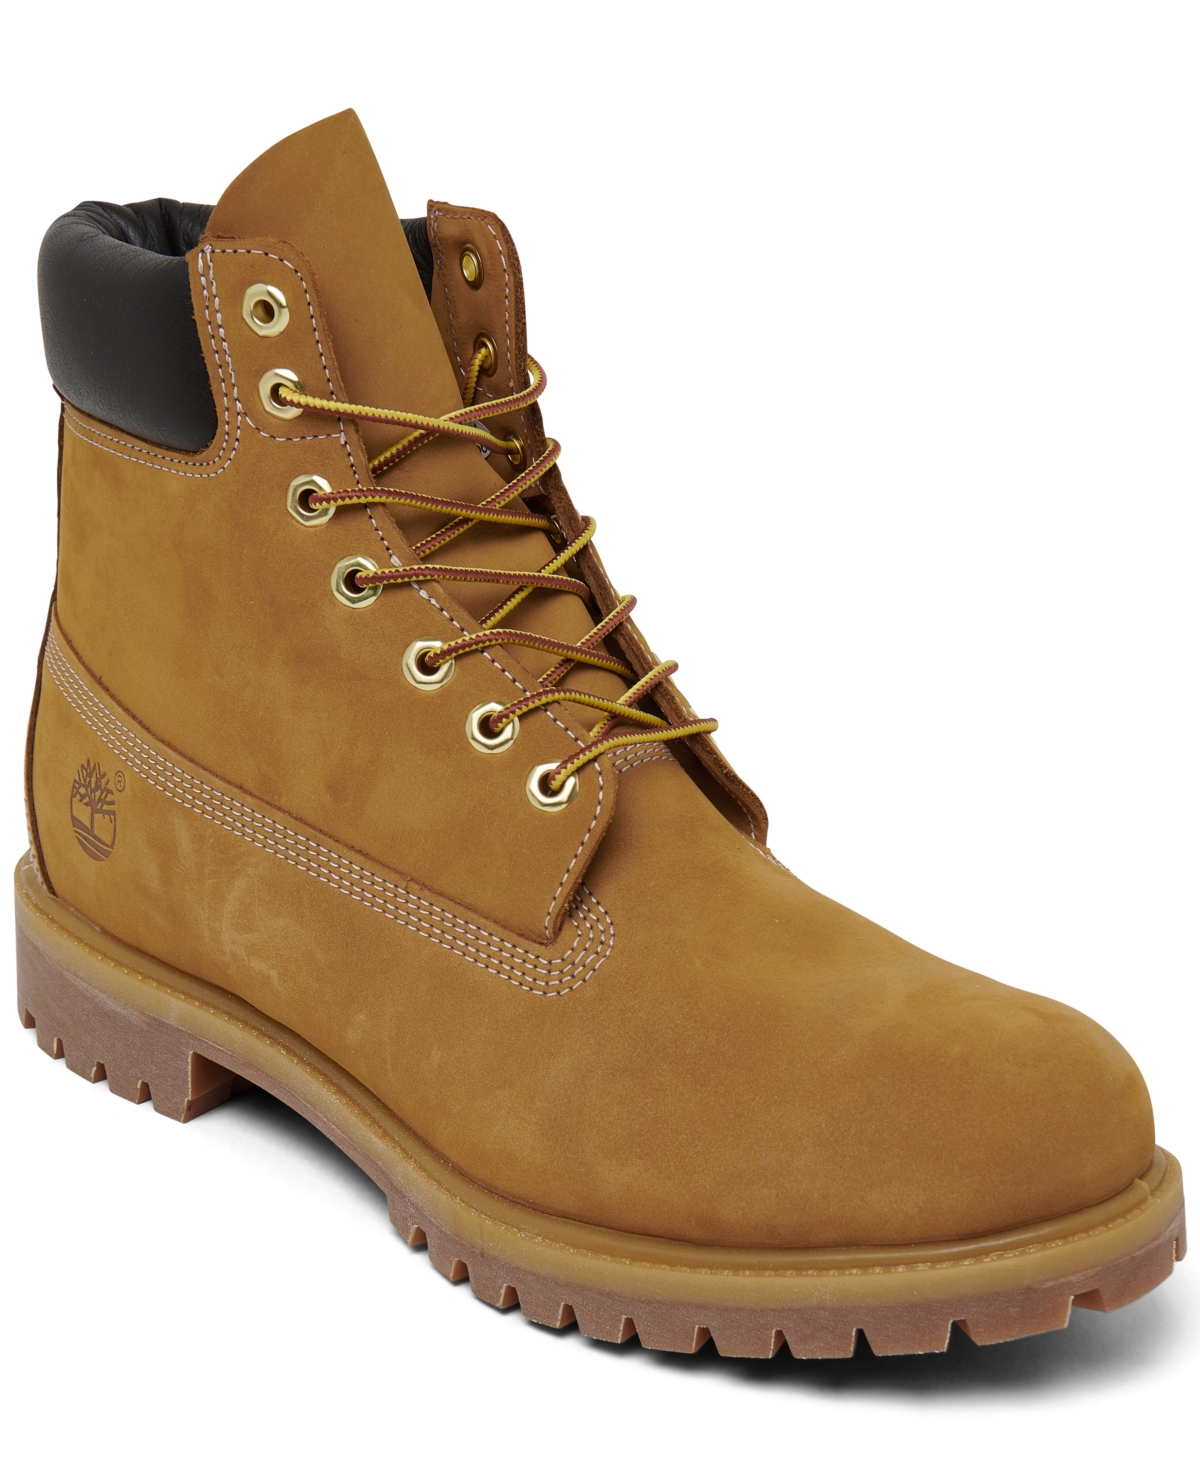 Shop Timberland Men's 6 Inch Premium Waterproof Boots From Finish Line In Wheat